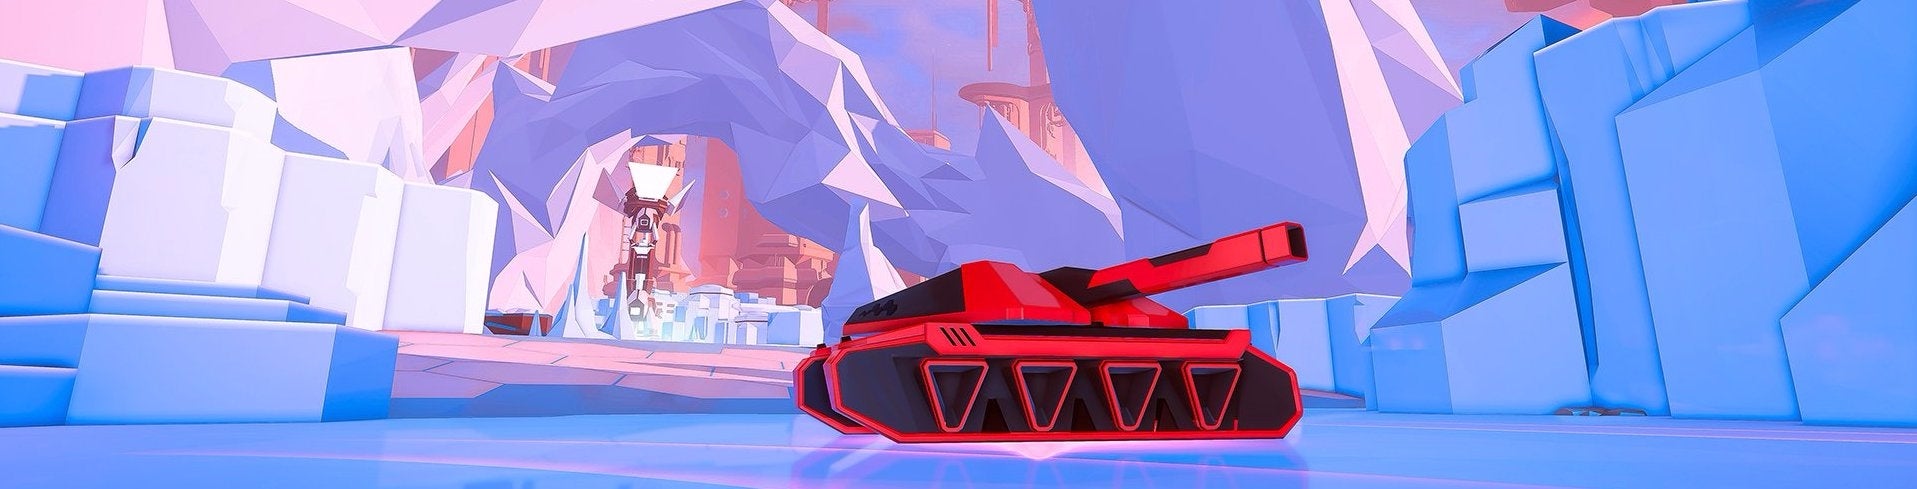 Image for 4-player co-op comes to Battlezone on PlayStation VR